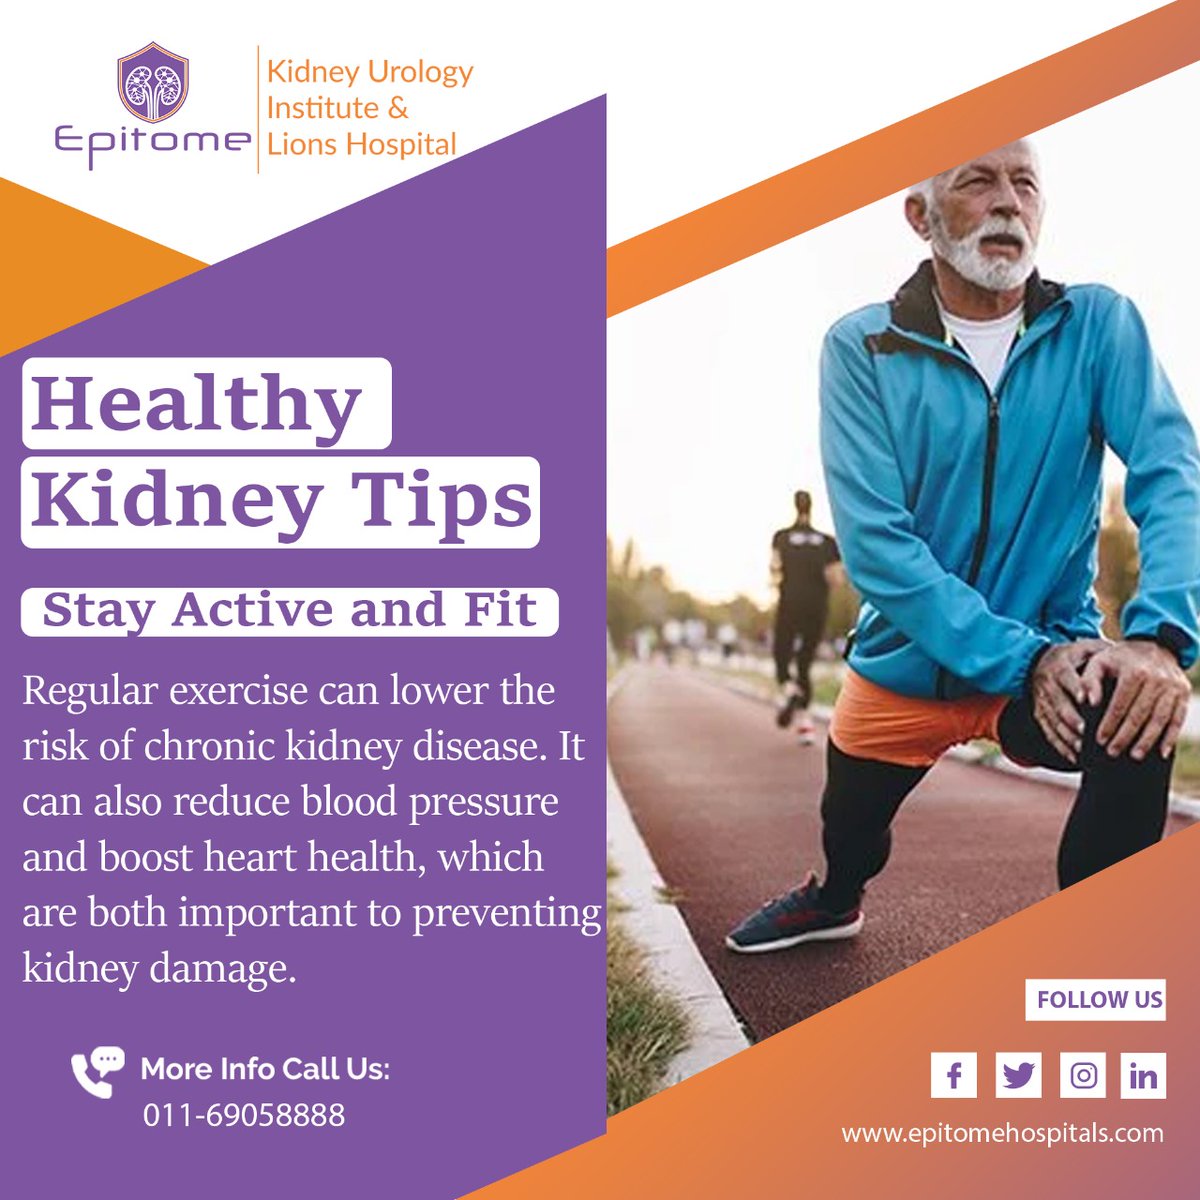 Regular exercise is good for more than just your waistline. 
Walking, running, cycling, and even dancing are great for health.
.
#kidney #kidneyhealth #kidneywarrior #kidneycancer #kidneys #kidneyawareness #kidneycare #kidneyproblems #kidneyinfection